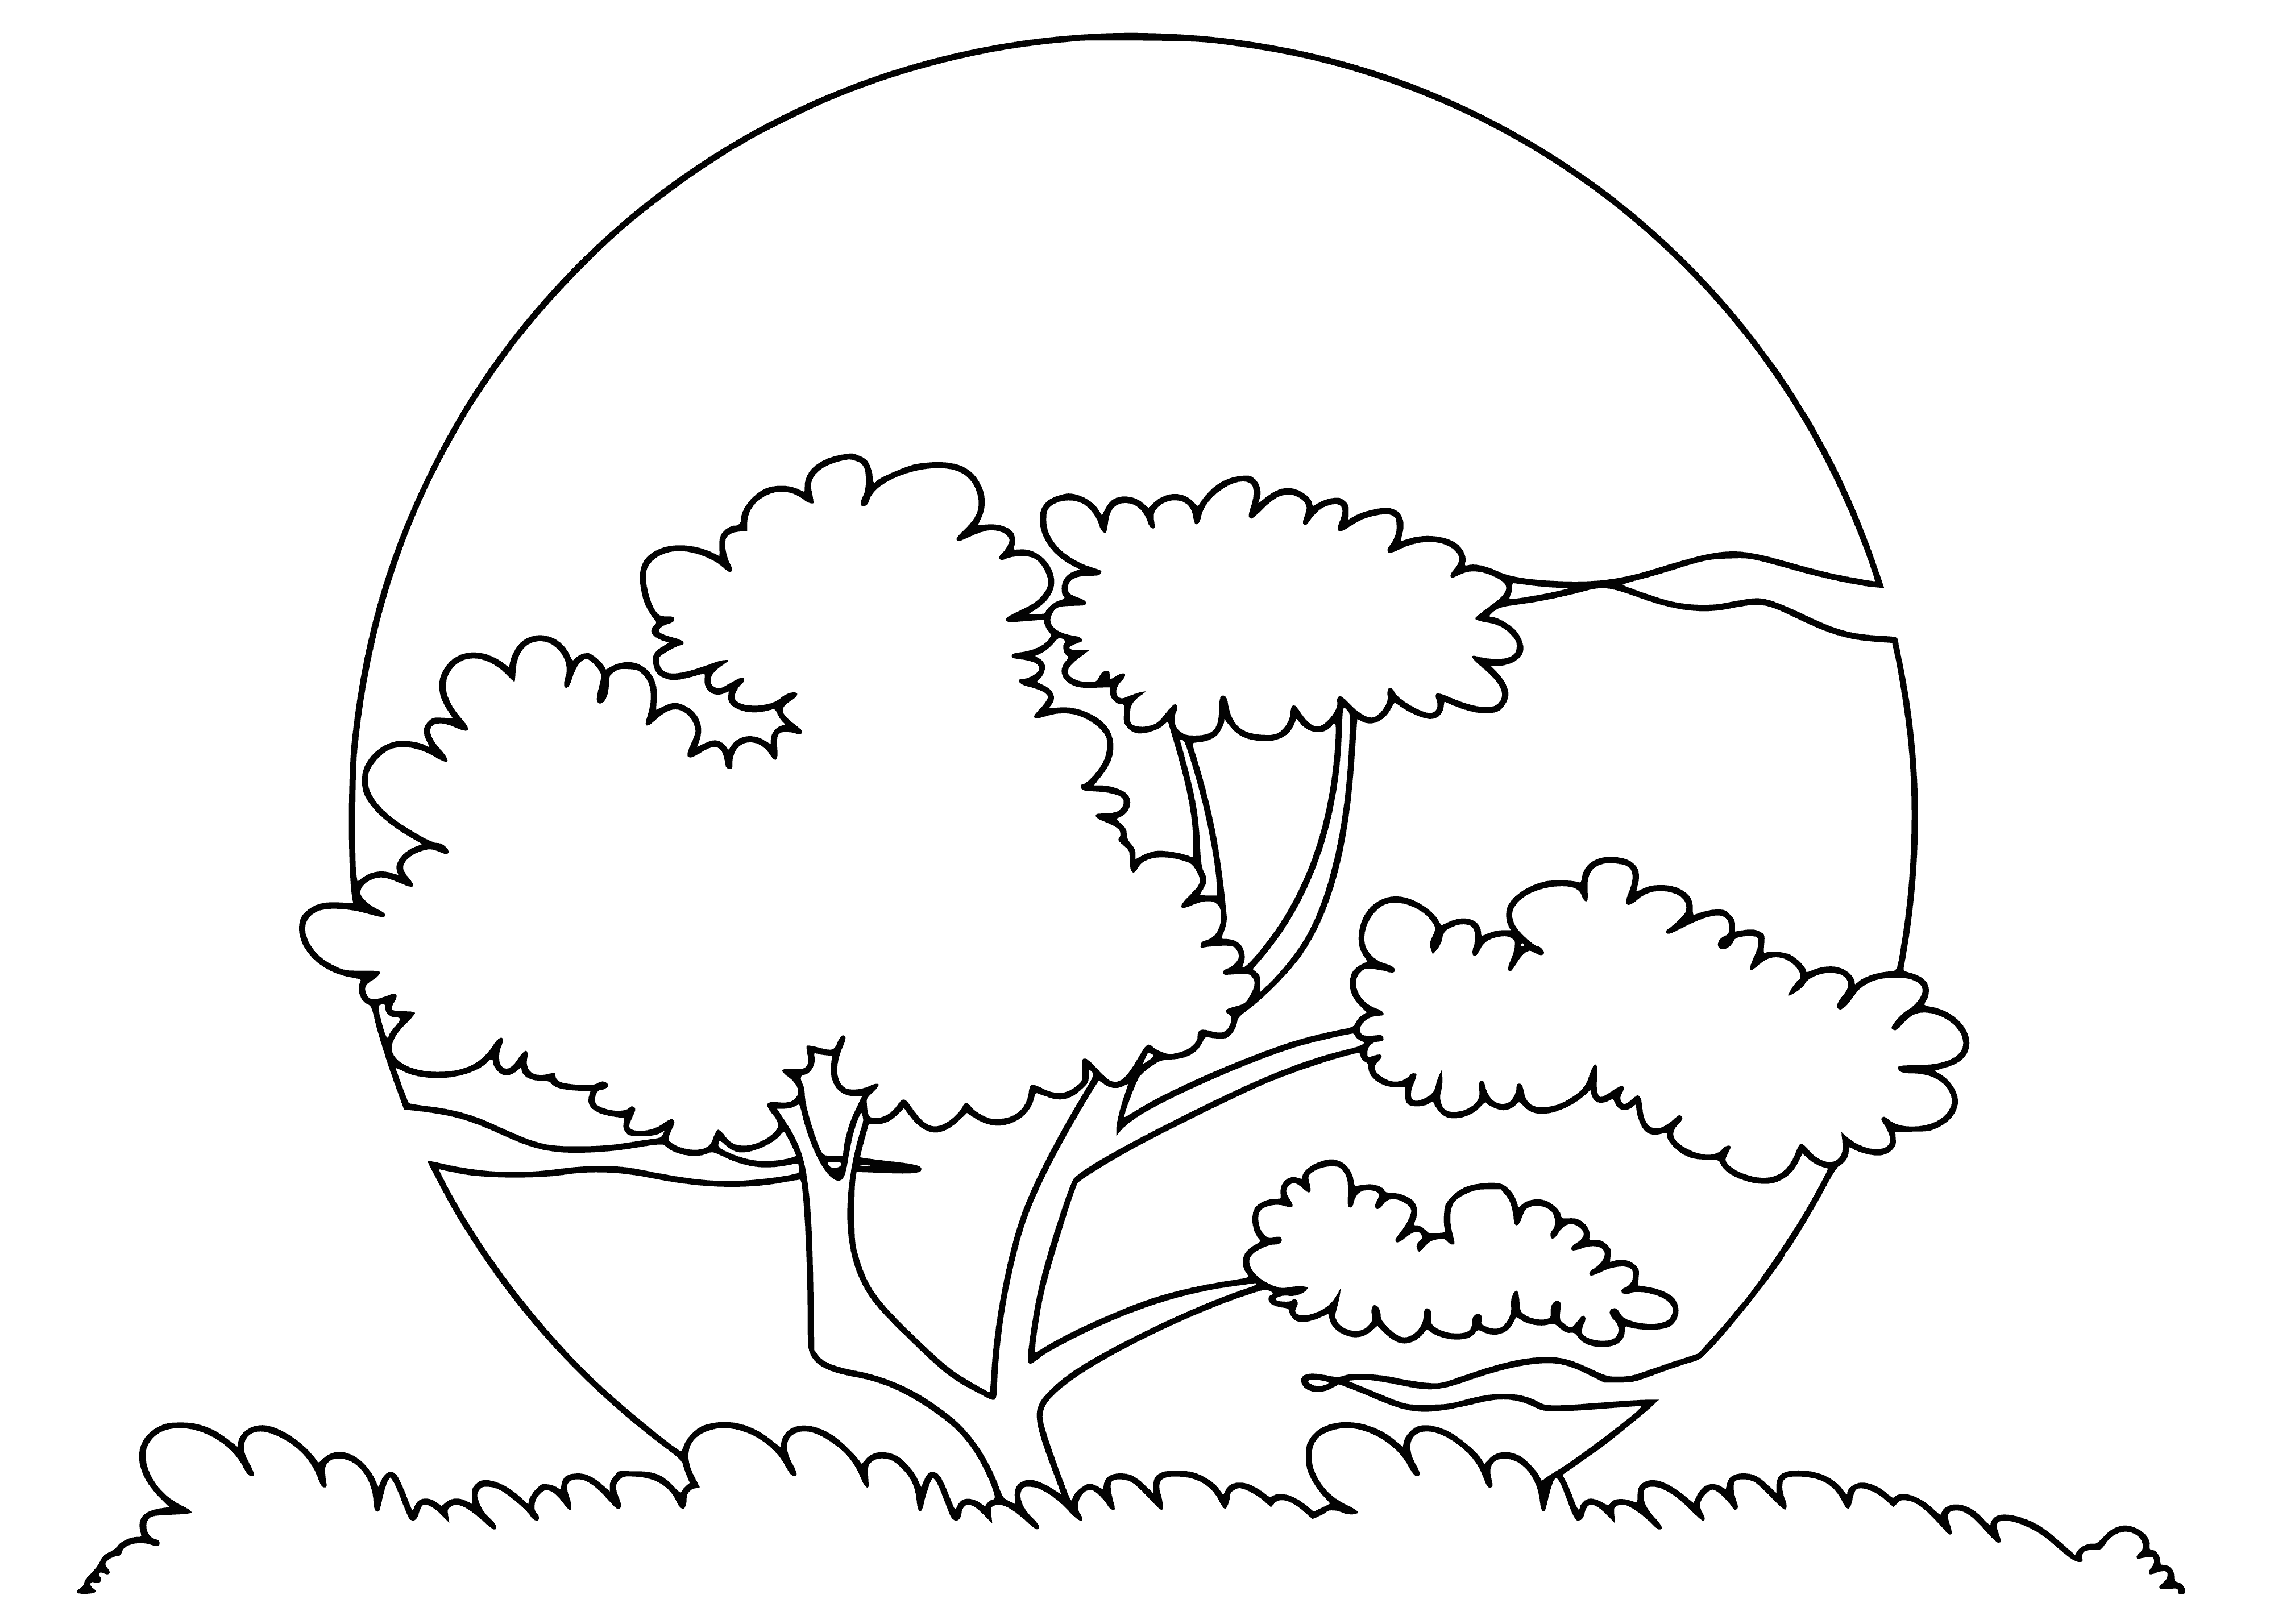 Tree at sunset coloring page